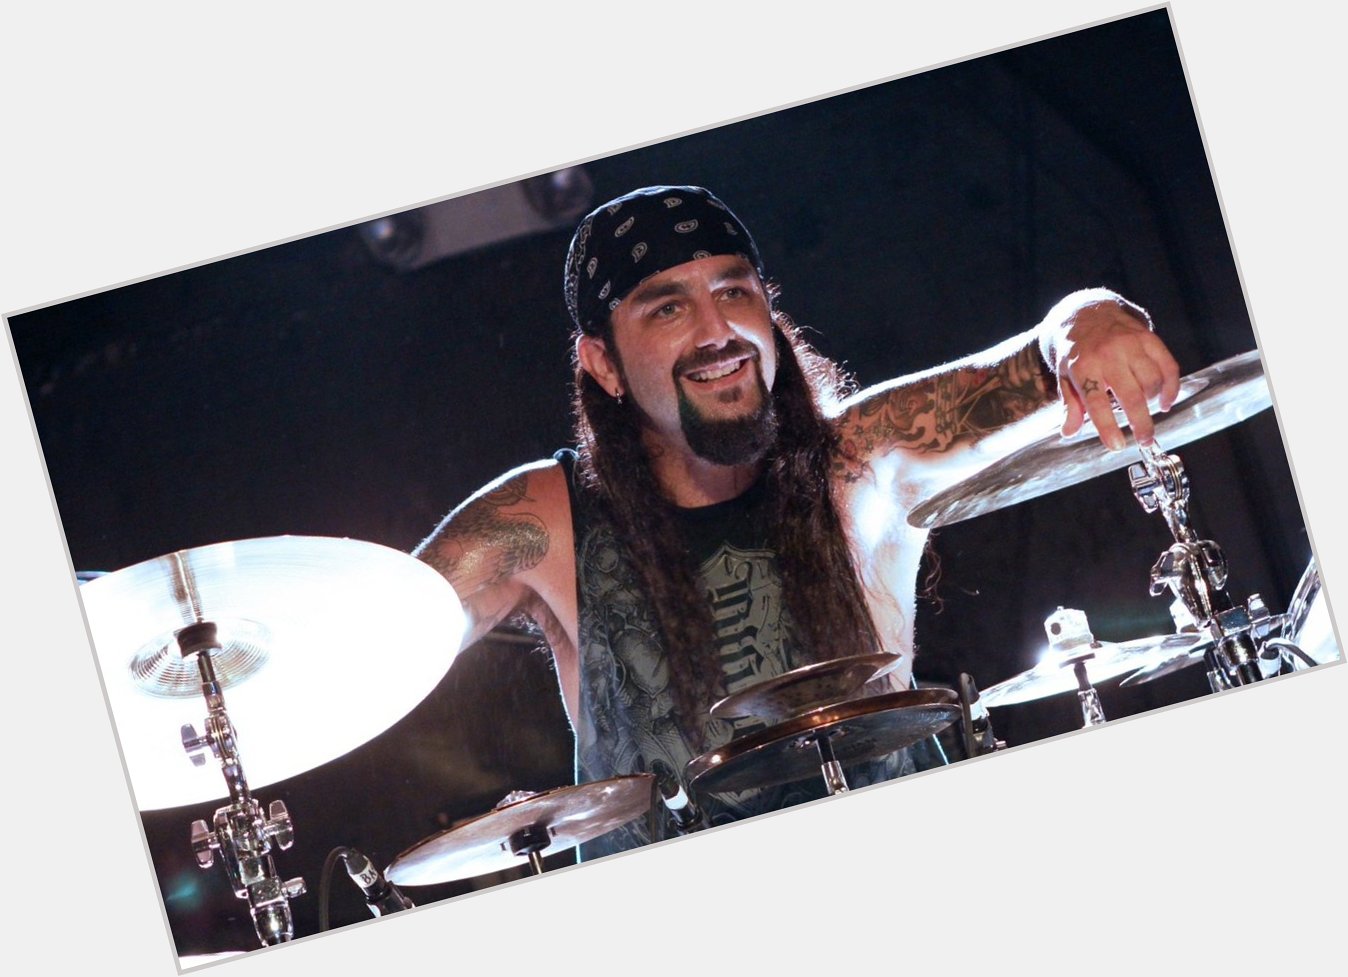 Dream Theater s drummer, Mike Portnoy turned 50 today! Happy birthday 